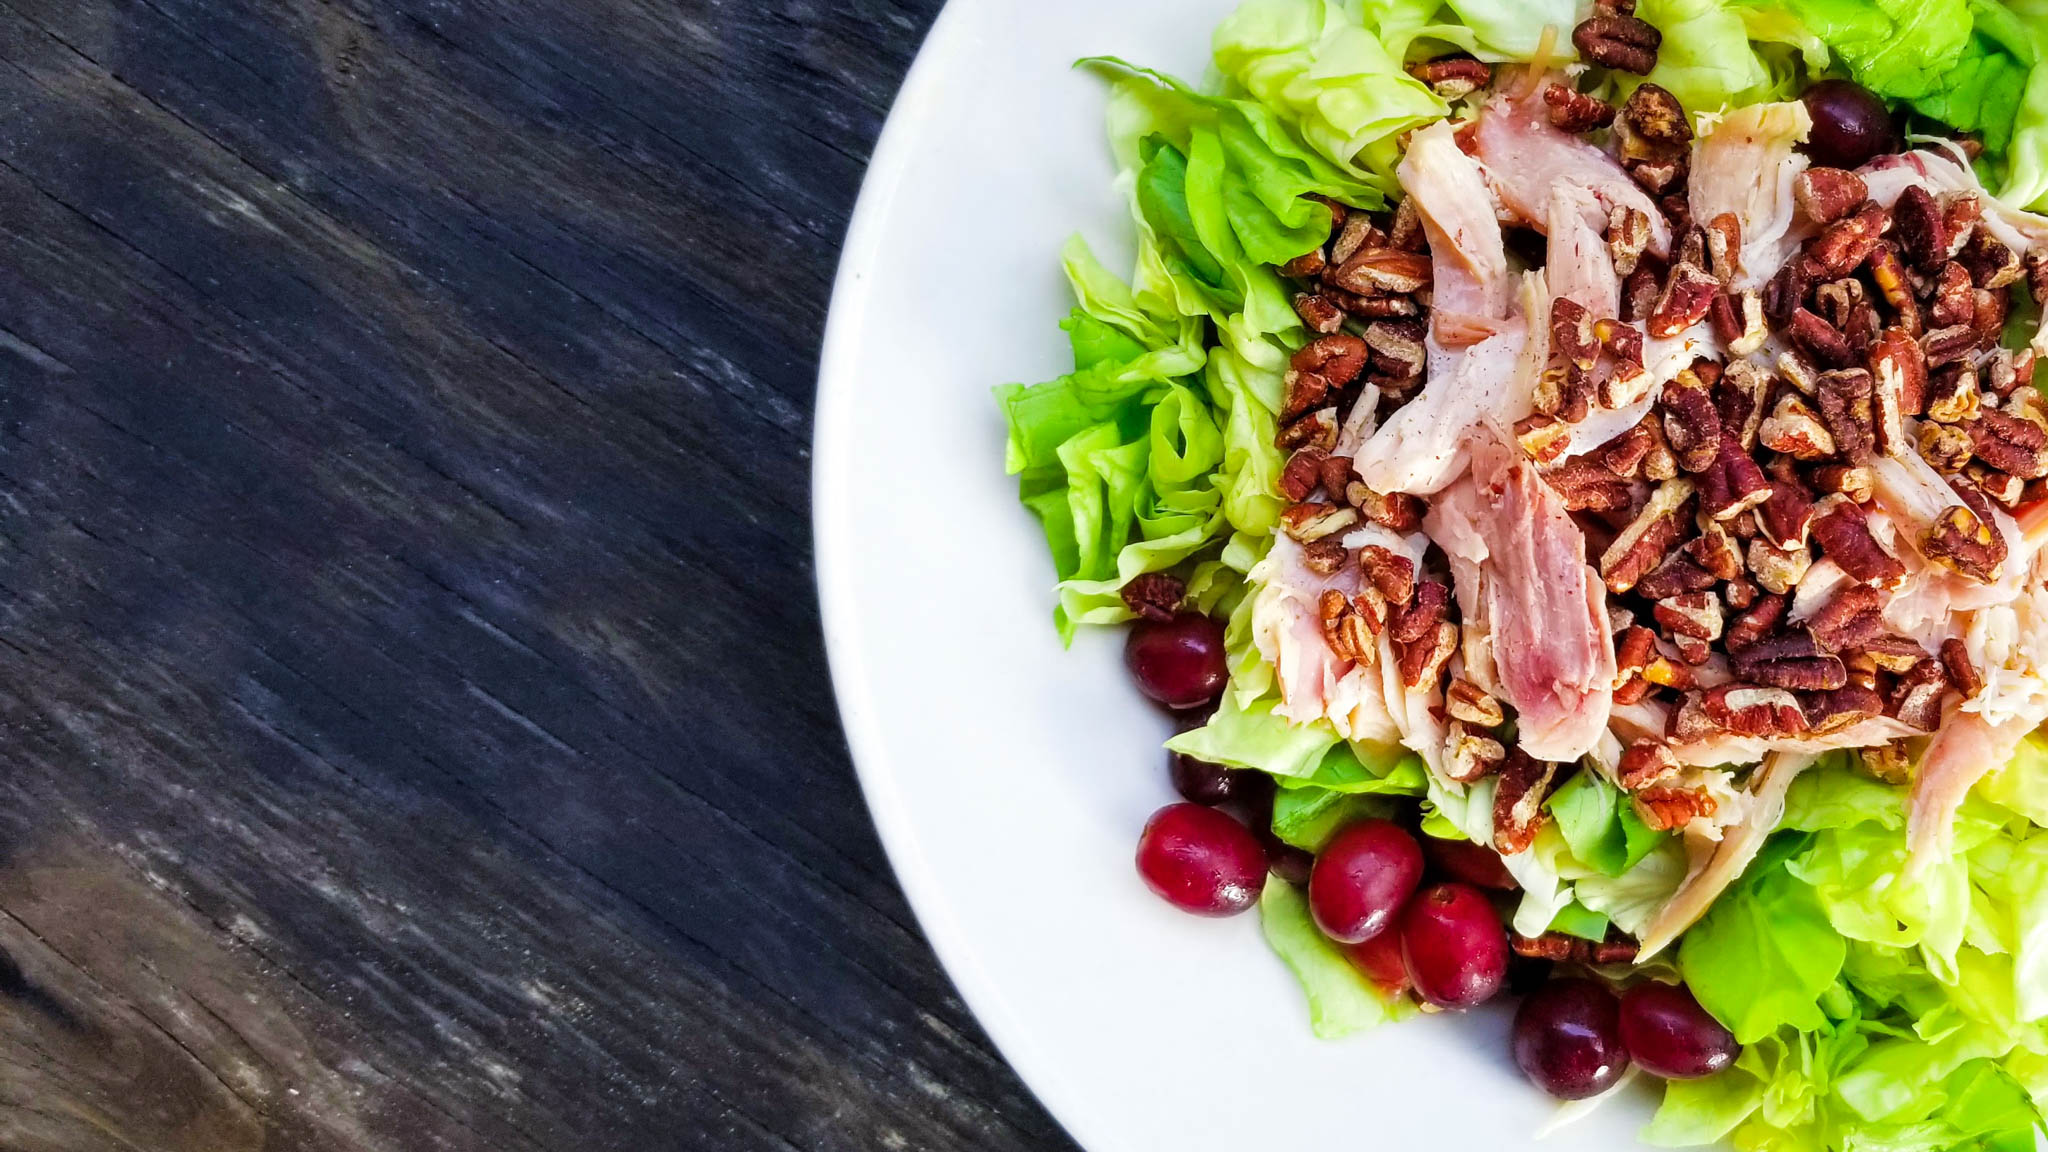 Salad of crisp butter lettuce, smoked chicken, toasted pecans, red seedless grapes.